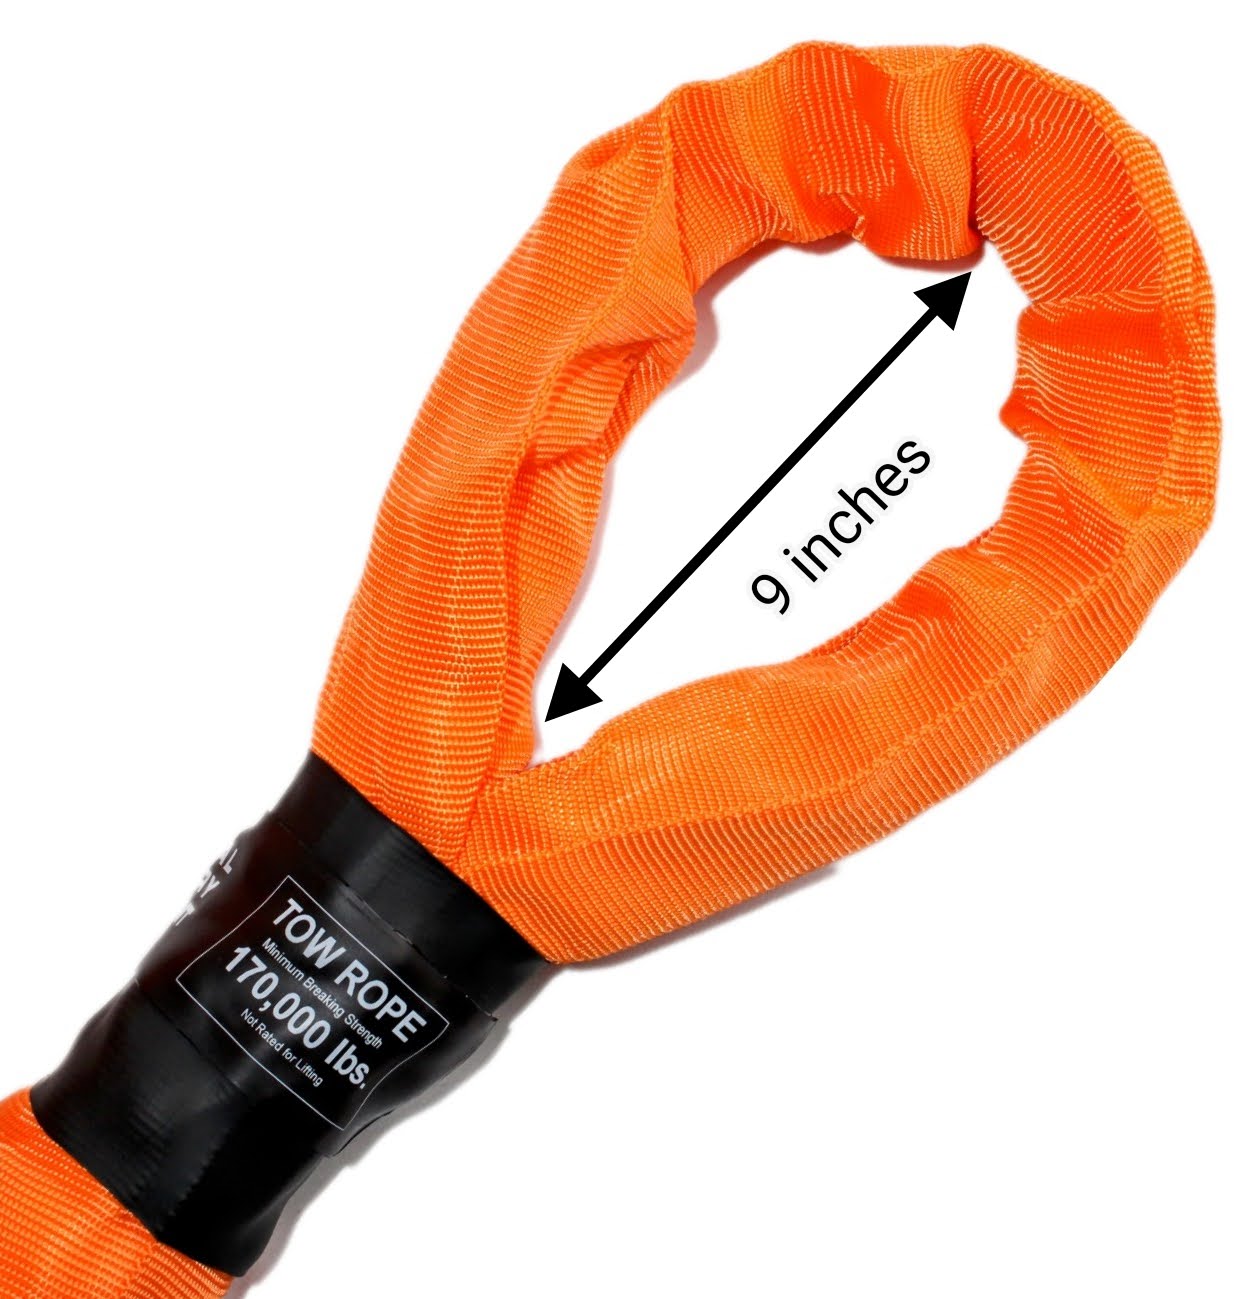 Industrial Tow Rope - 170,000 lb. Minimum Breaking Strength - Heavy Duty Vehicles Up to 100,000 lbs. (Product Length: 30 ft.)